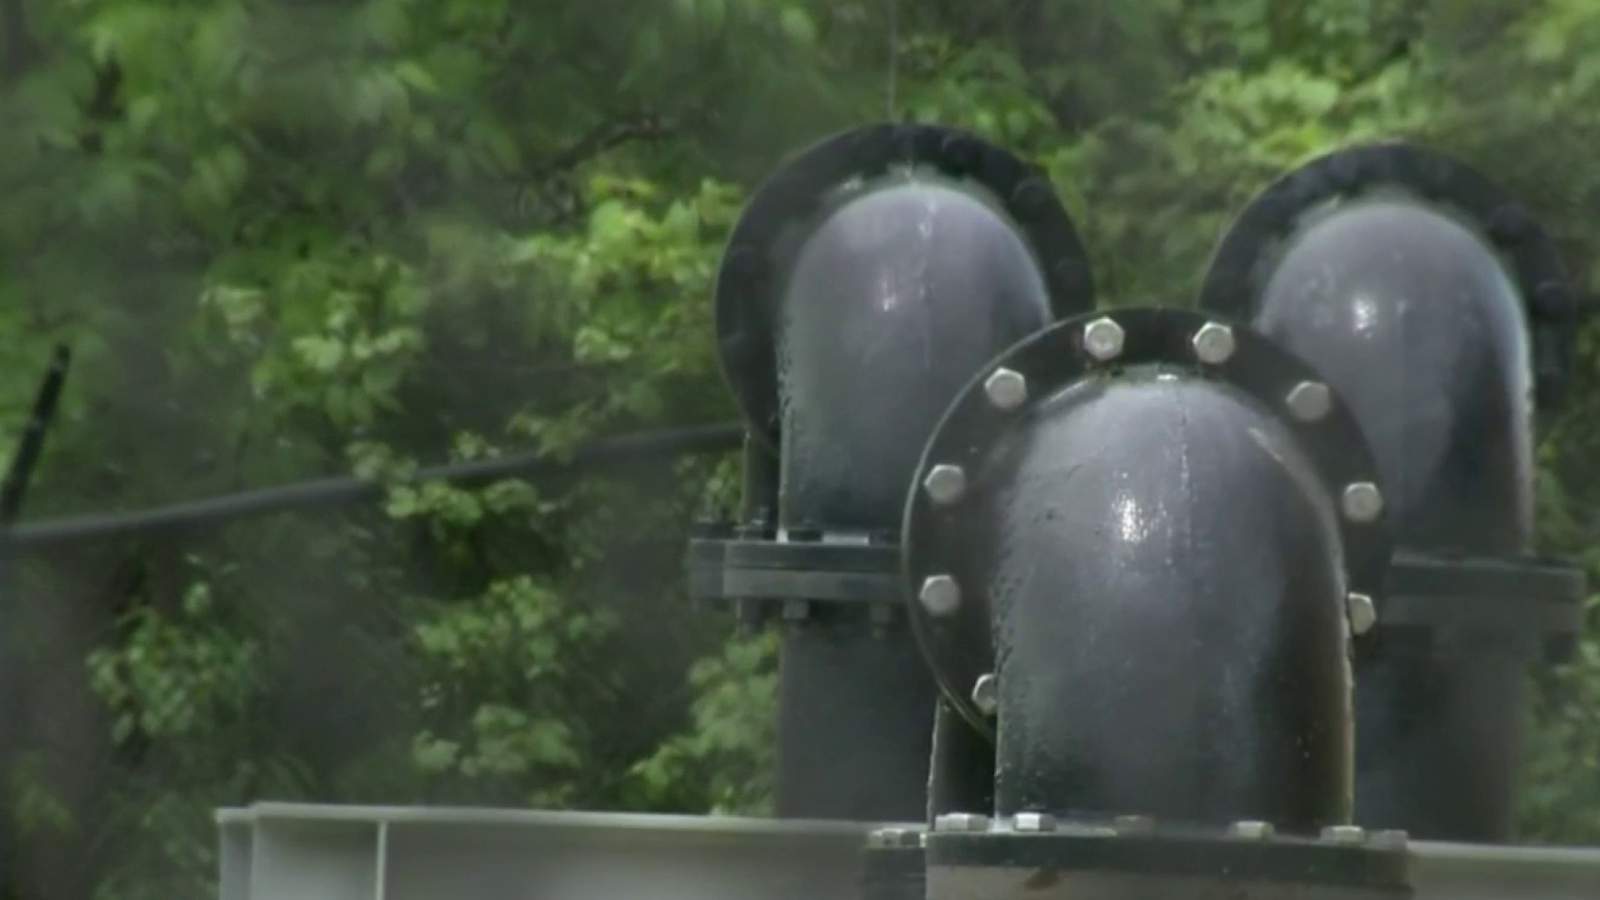 Michigan rejects Macomb County sewage treatment lagoon plan - WDIV ClickOnDetroit